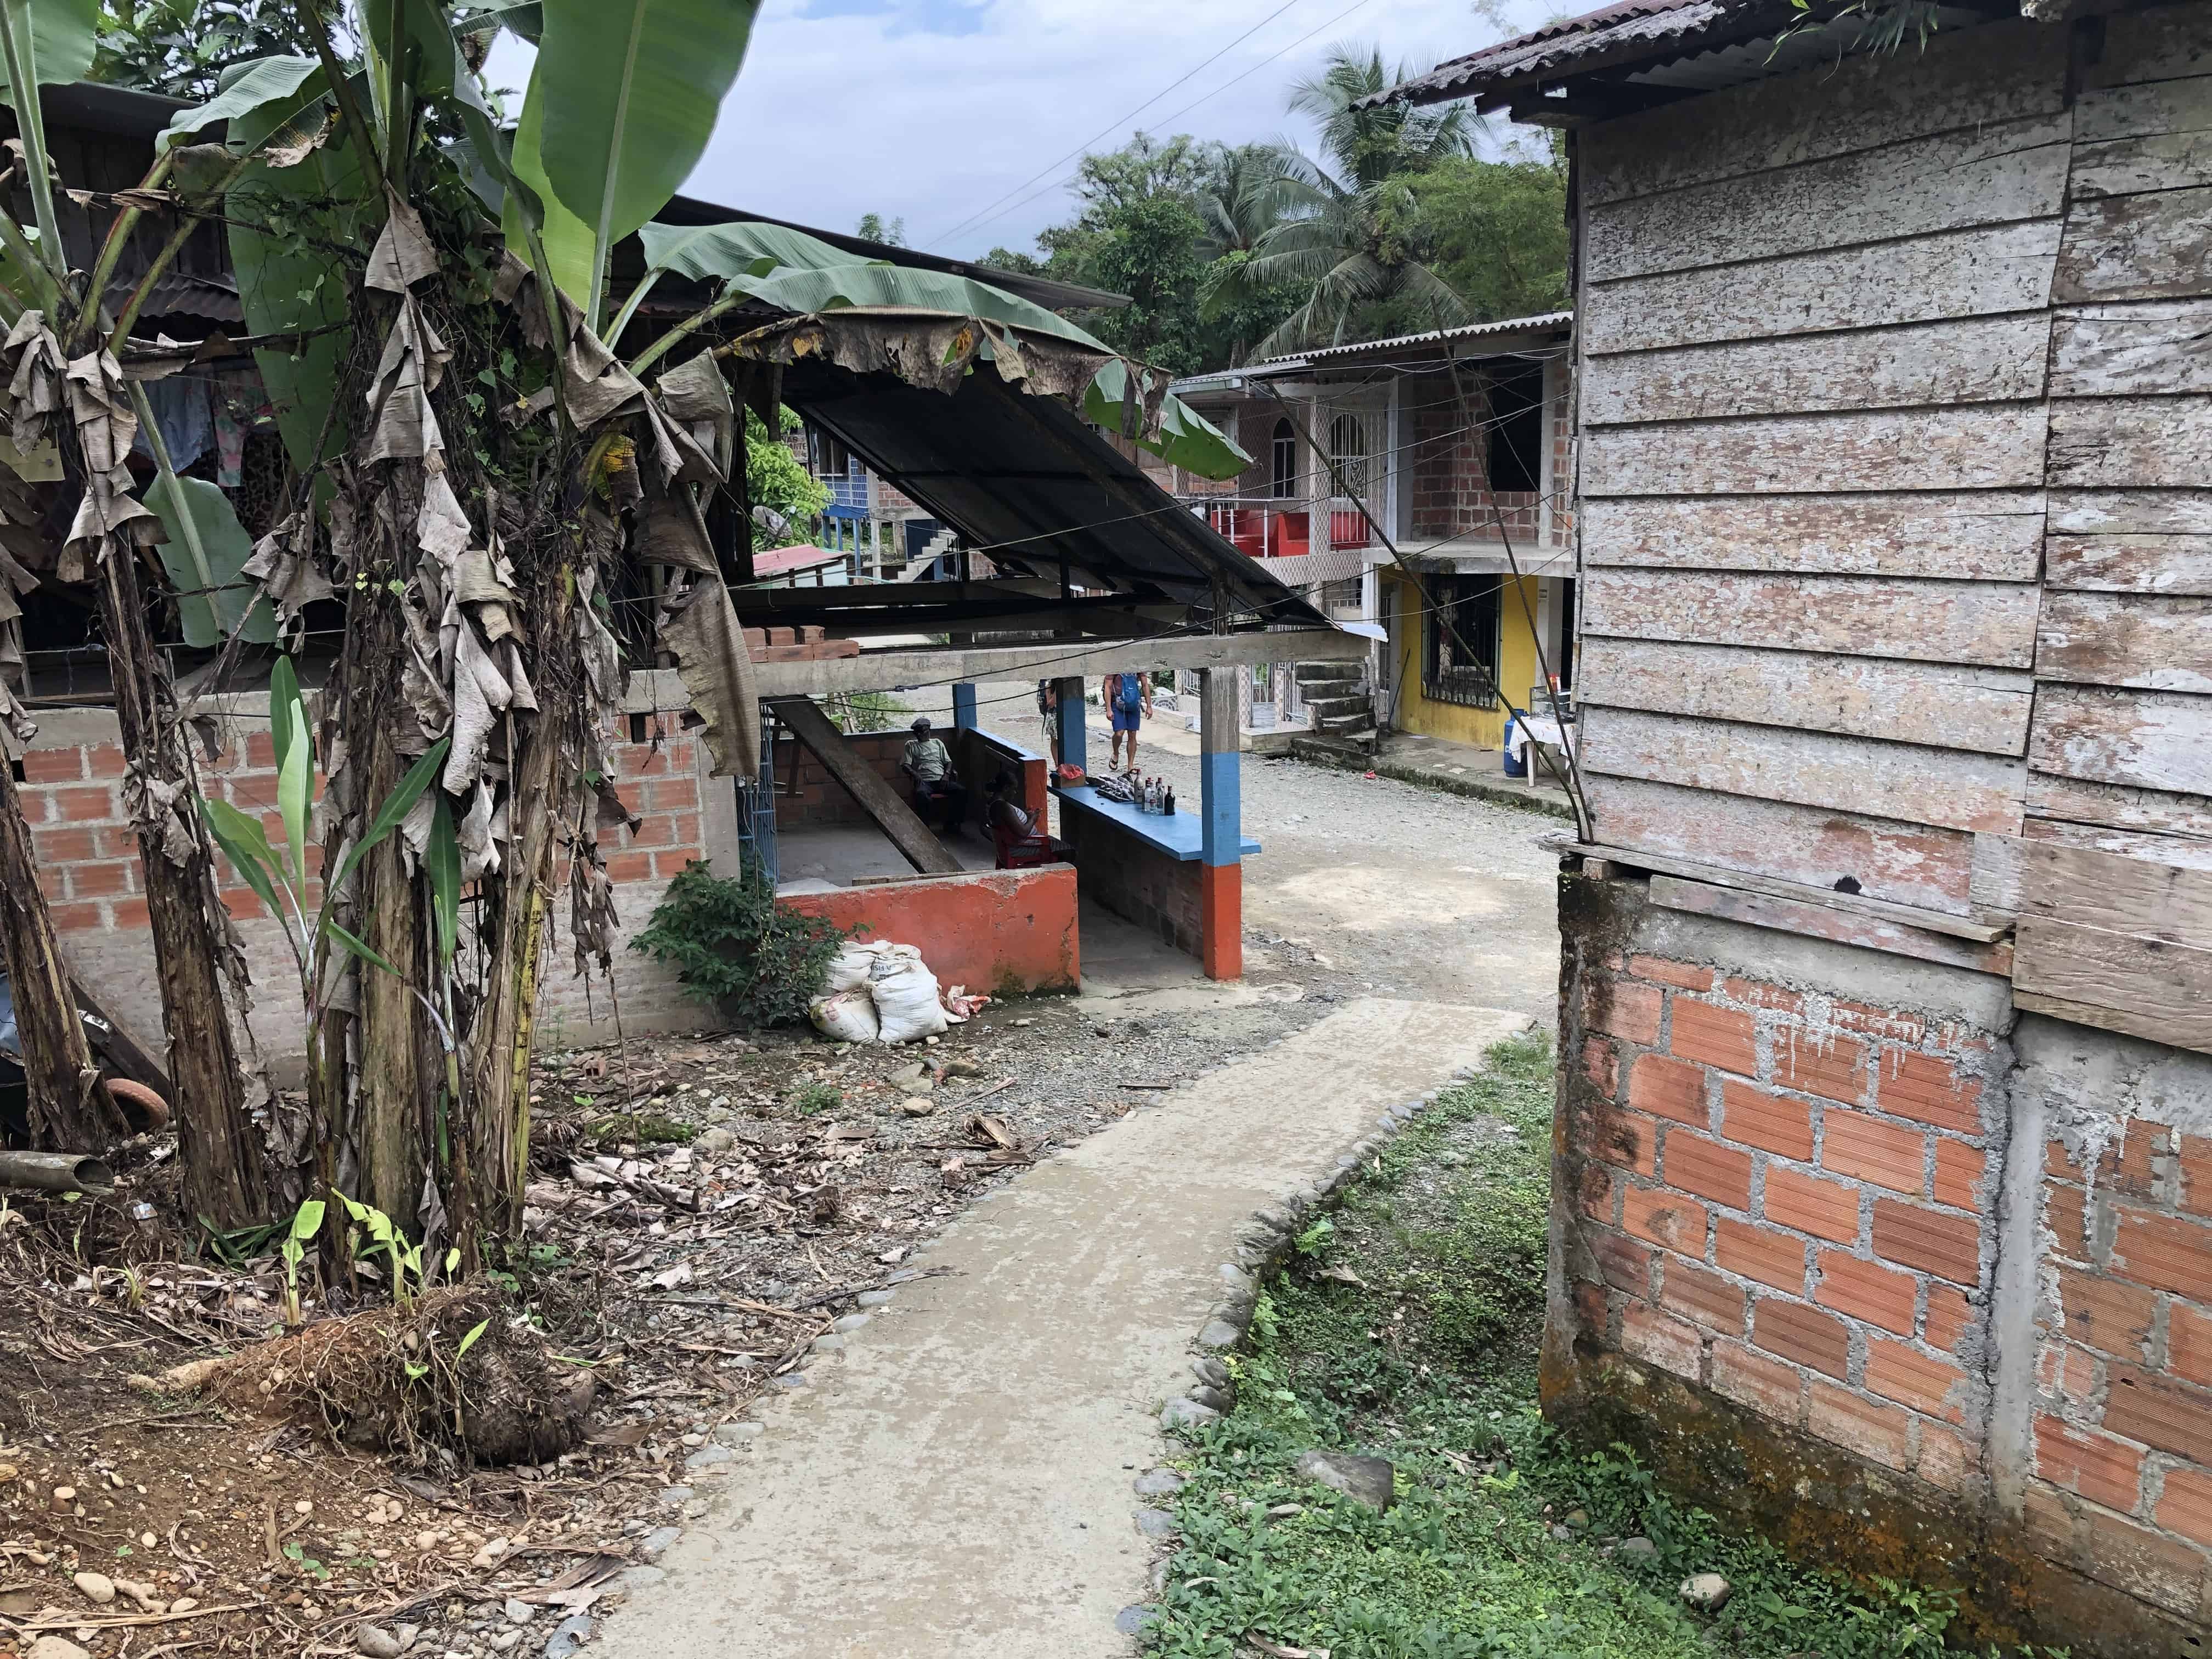 Walking down from the brujita stop in San Cipriano, Valle del Cauca, Colombia